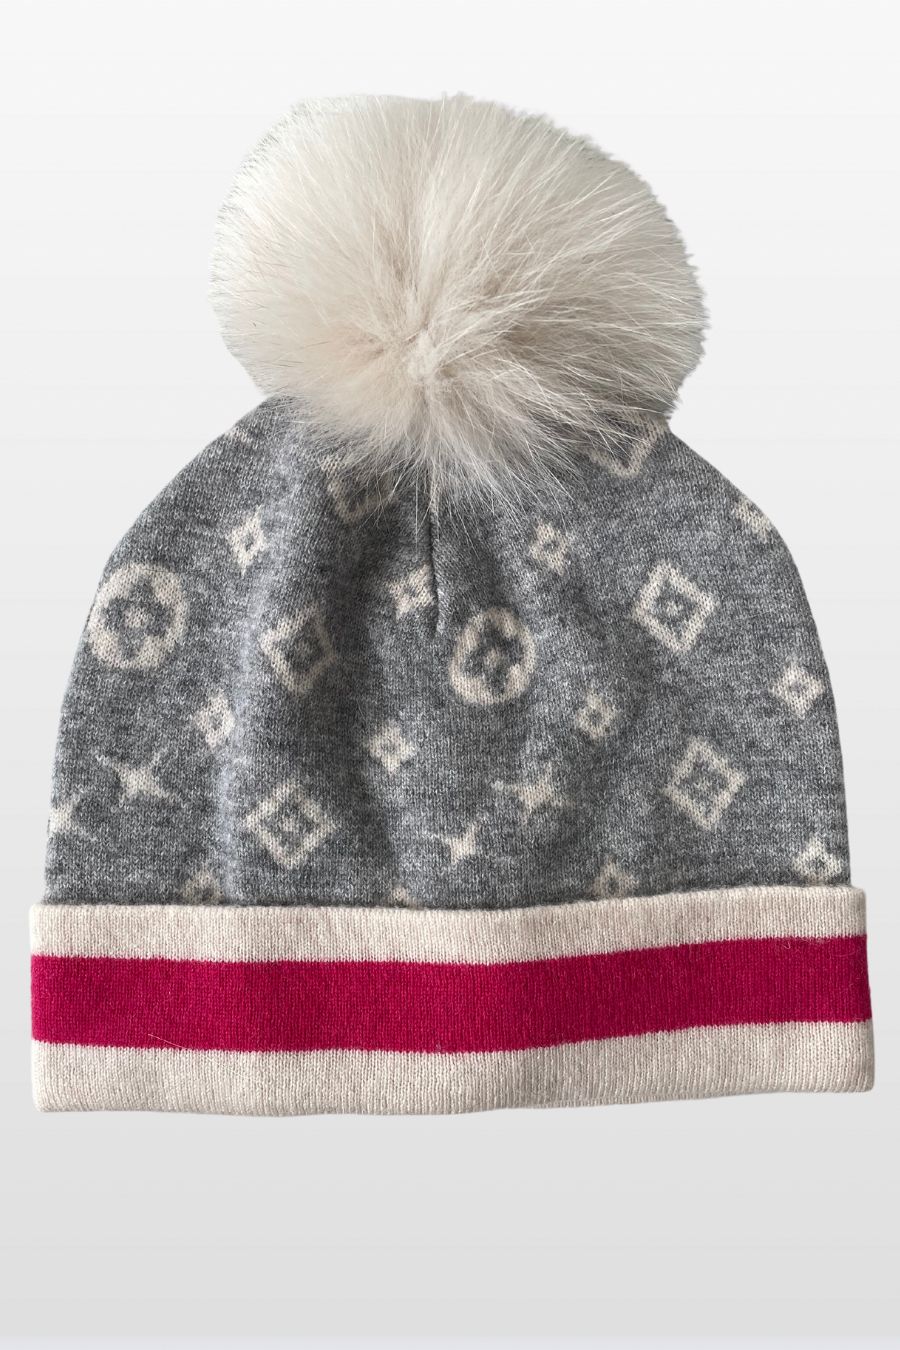 Monogram Pattern Hat with Contrasting Border